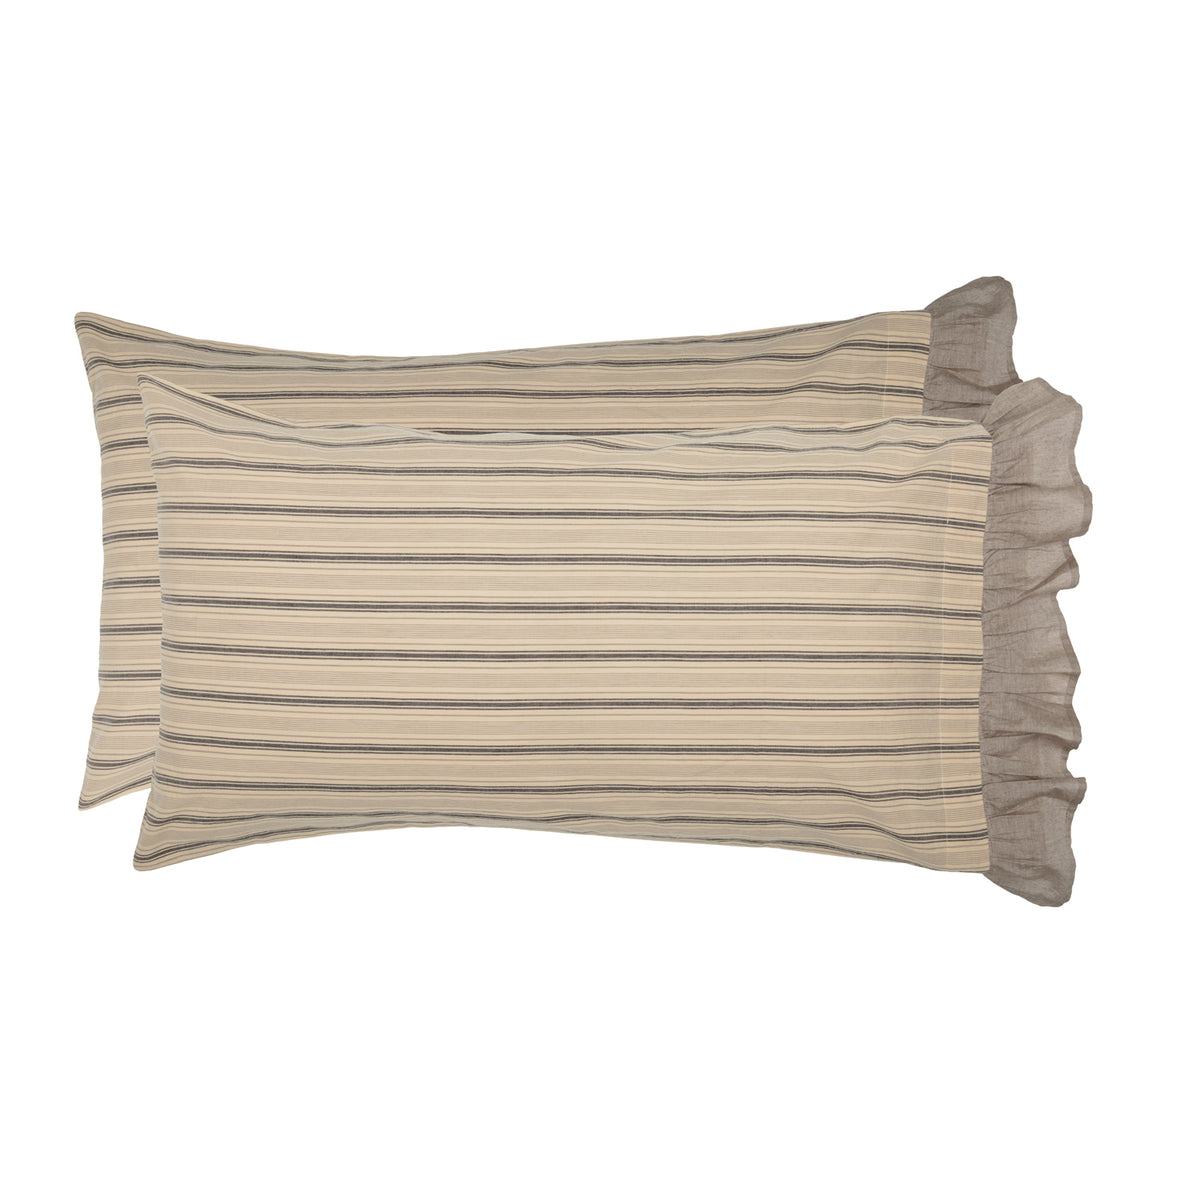 Sawyer Mill Charcoal King Pillow Case Set of 2 21x40